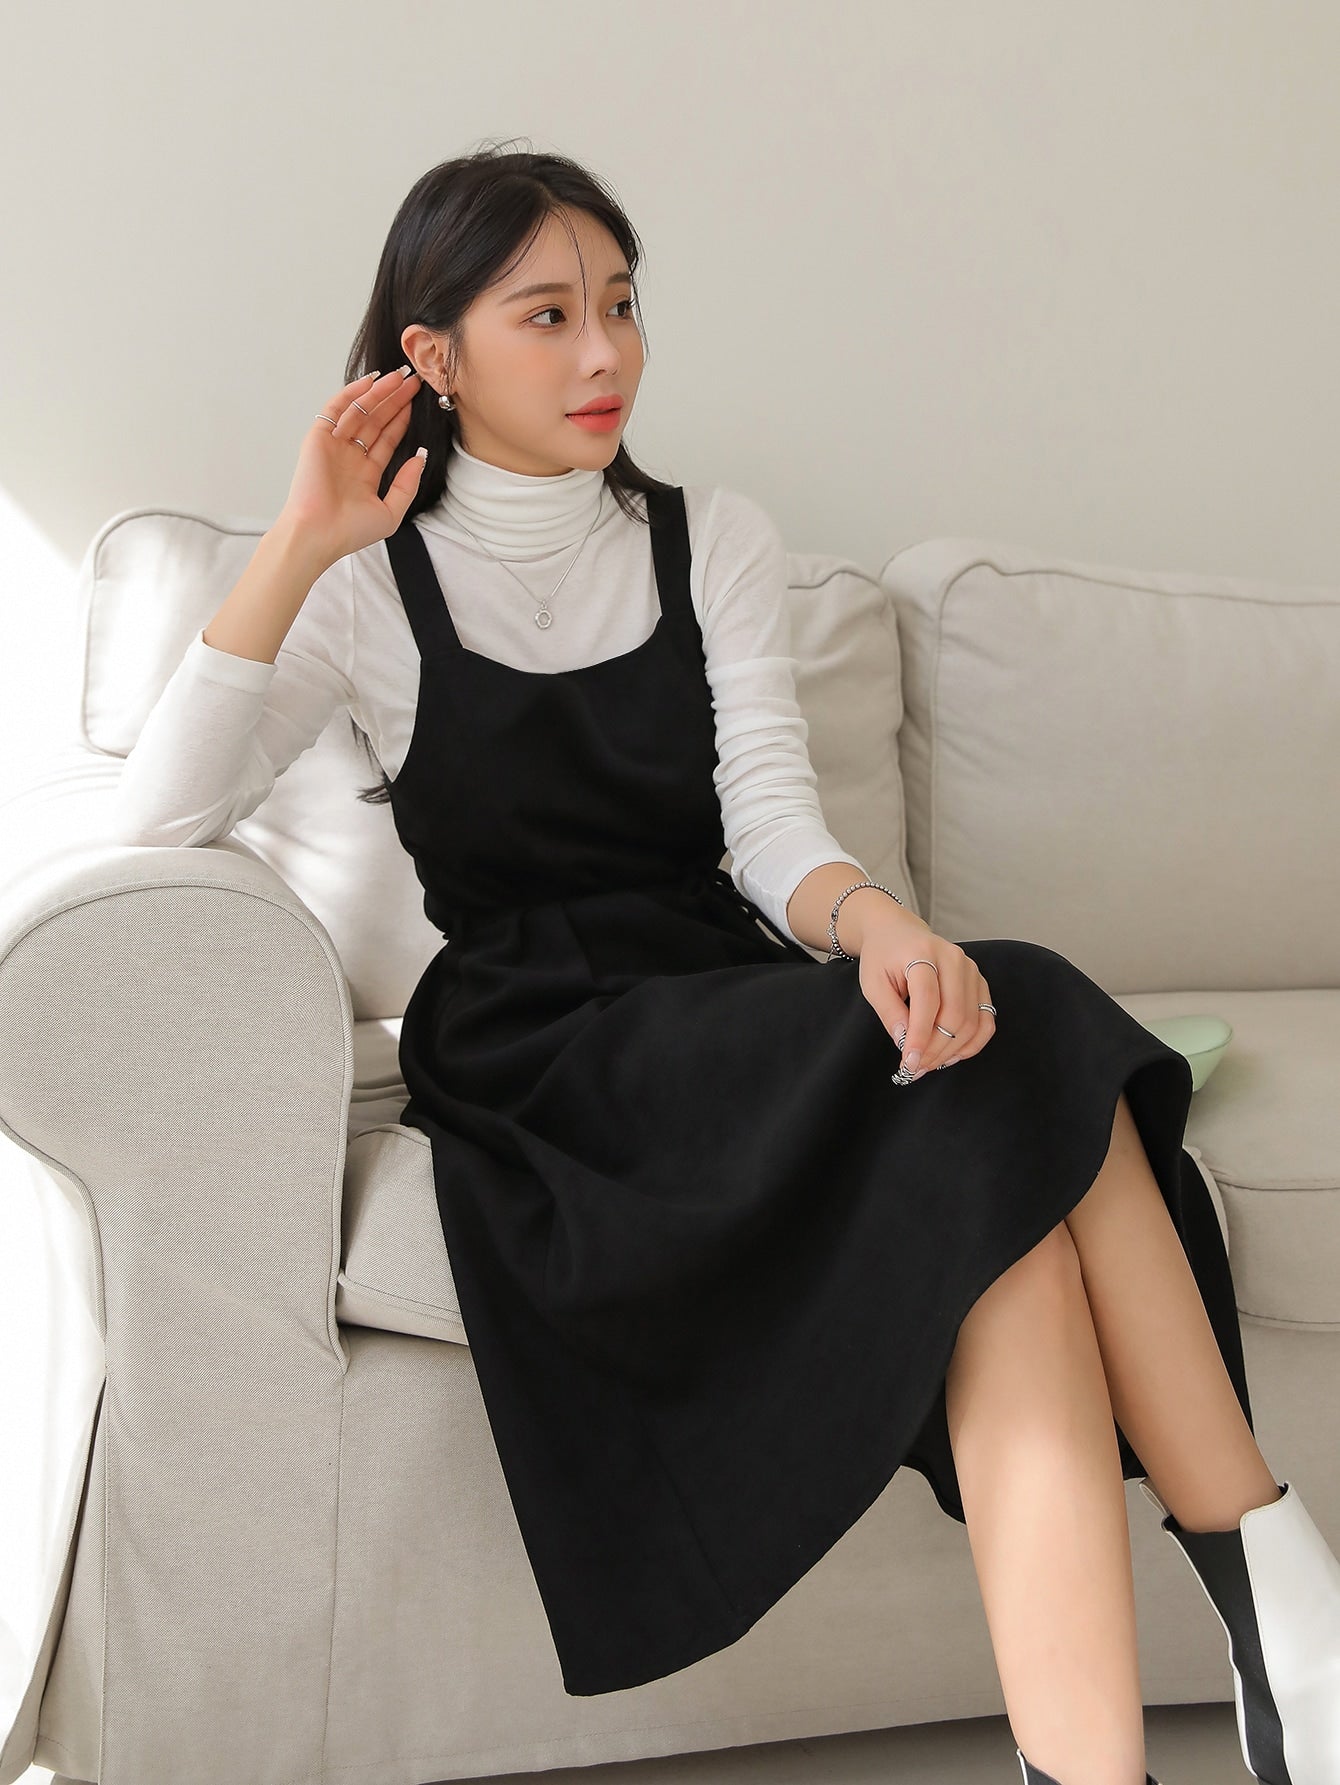 Solid Belted Overall Dress Without Top